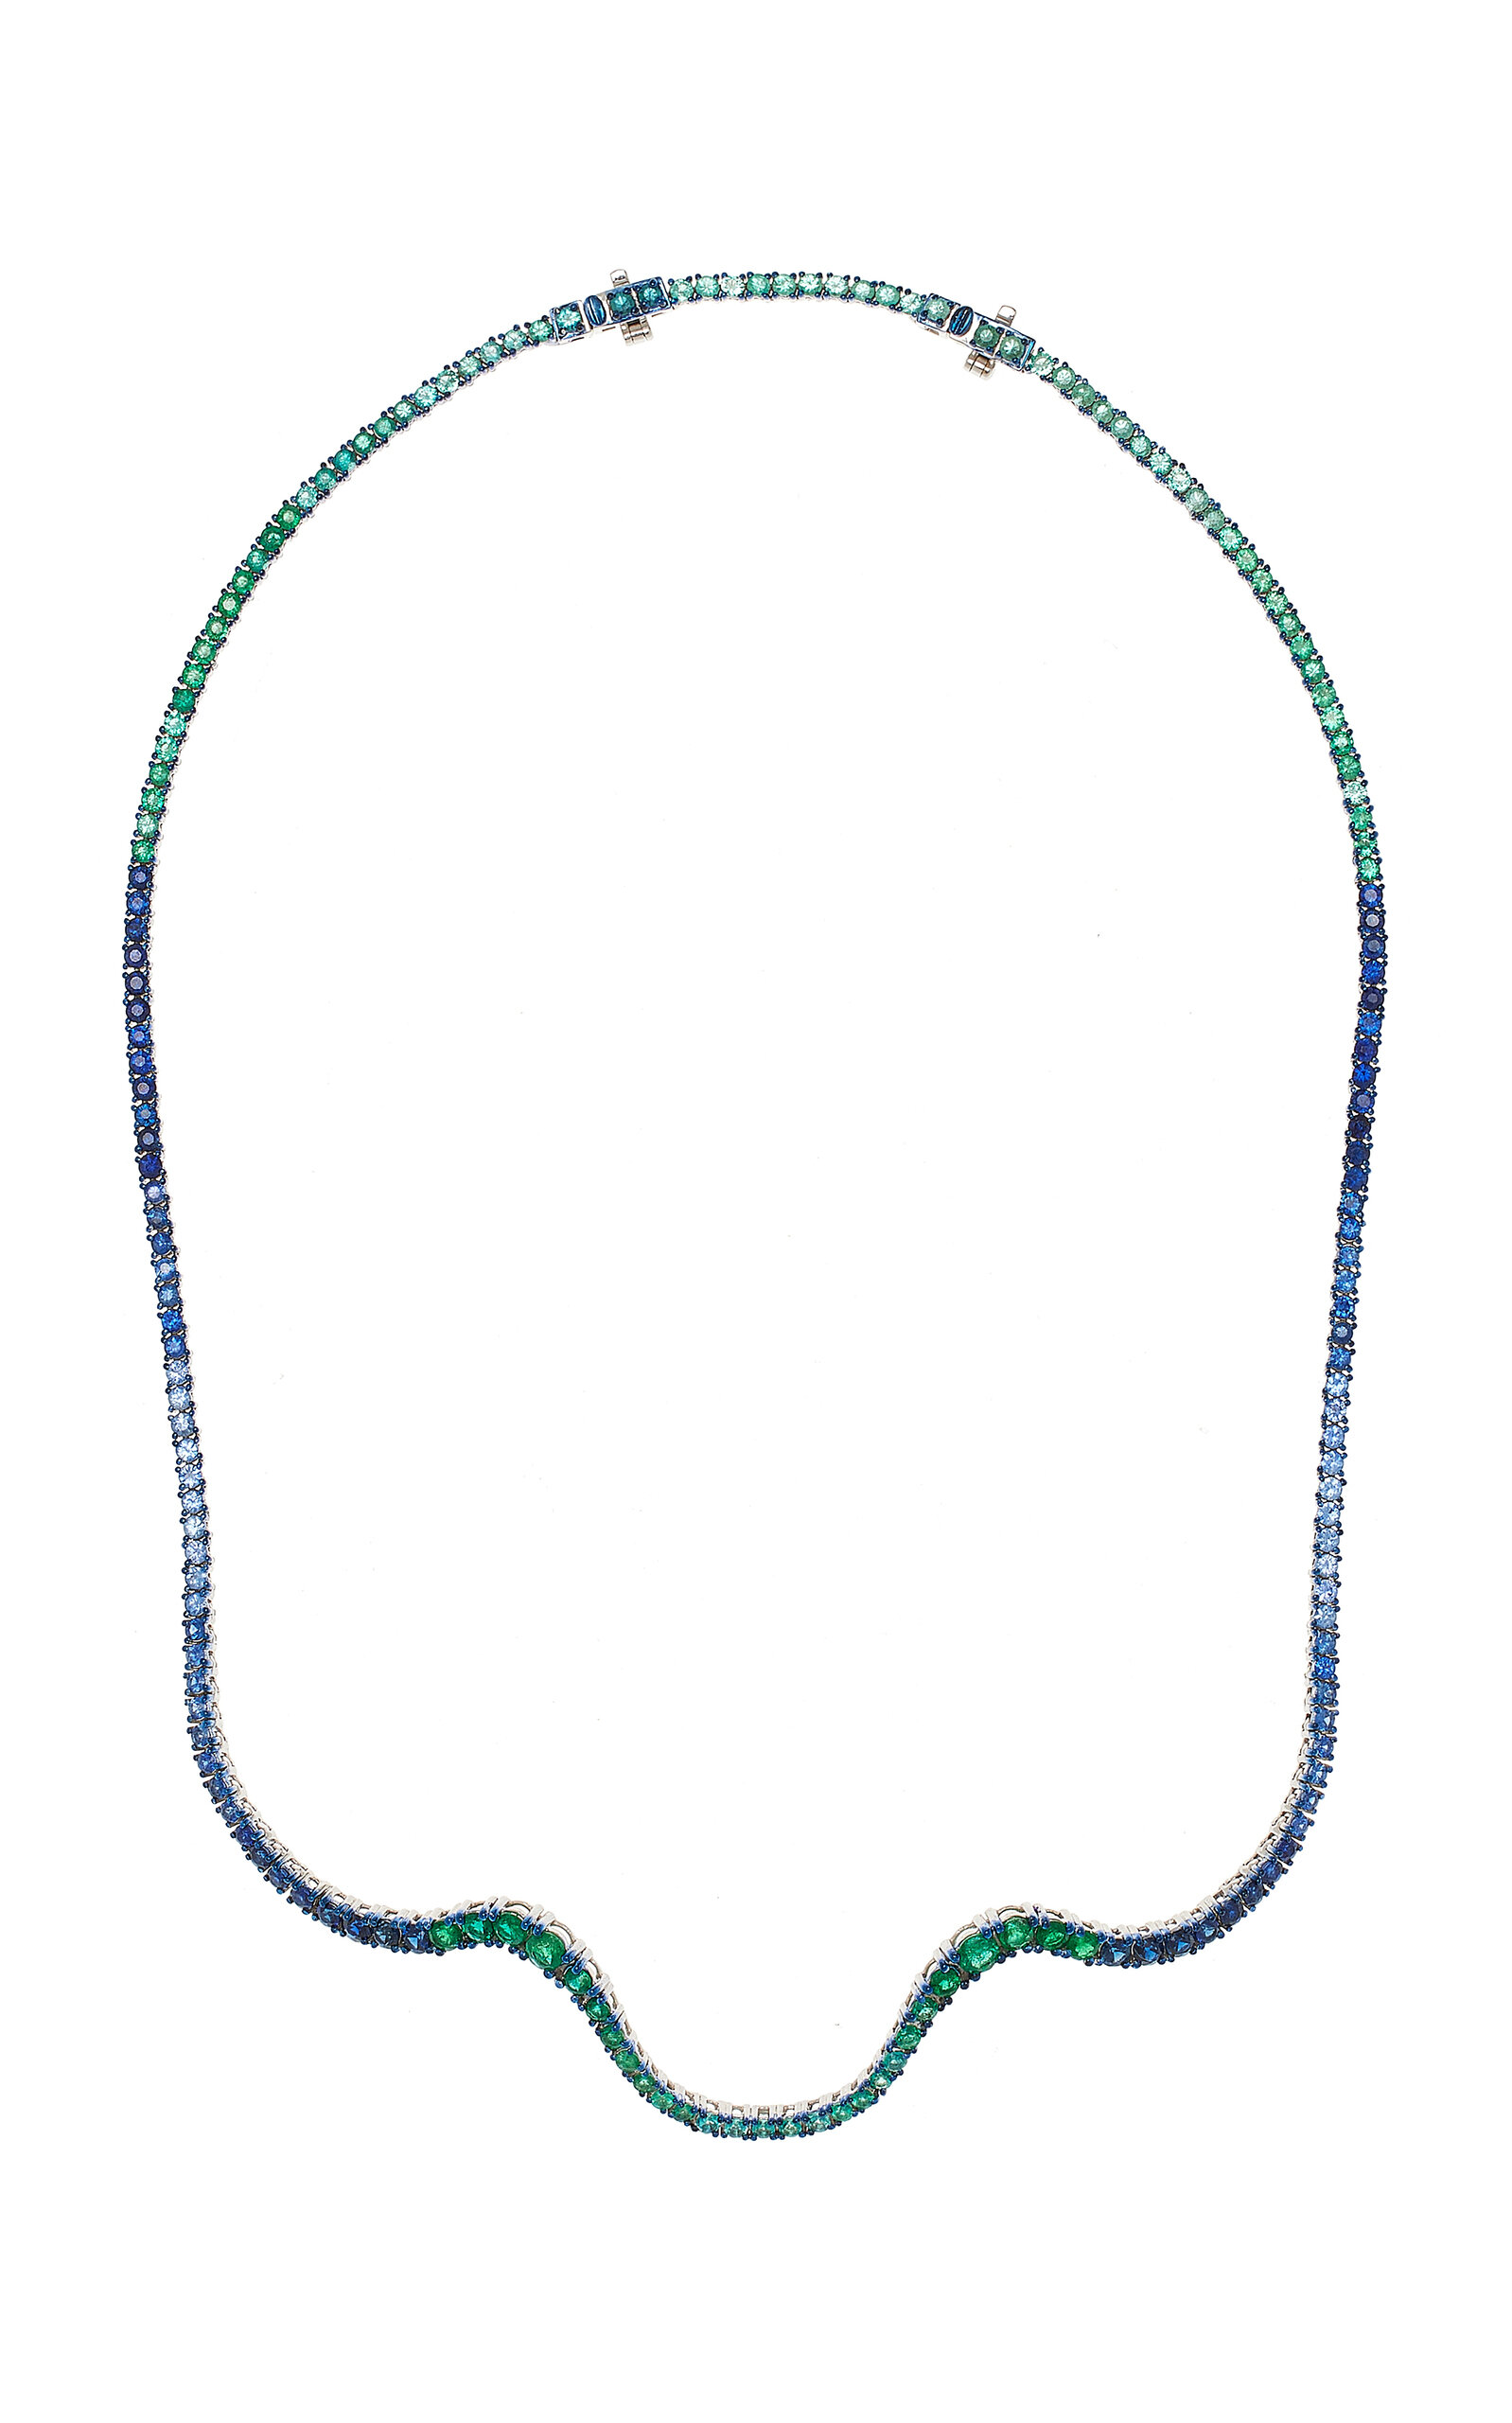 Marie Mas 18k White Gold ; Emerald And Sapphire Choker Necklace In Multi